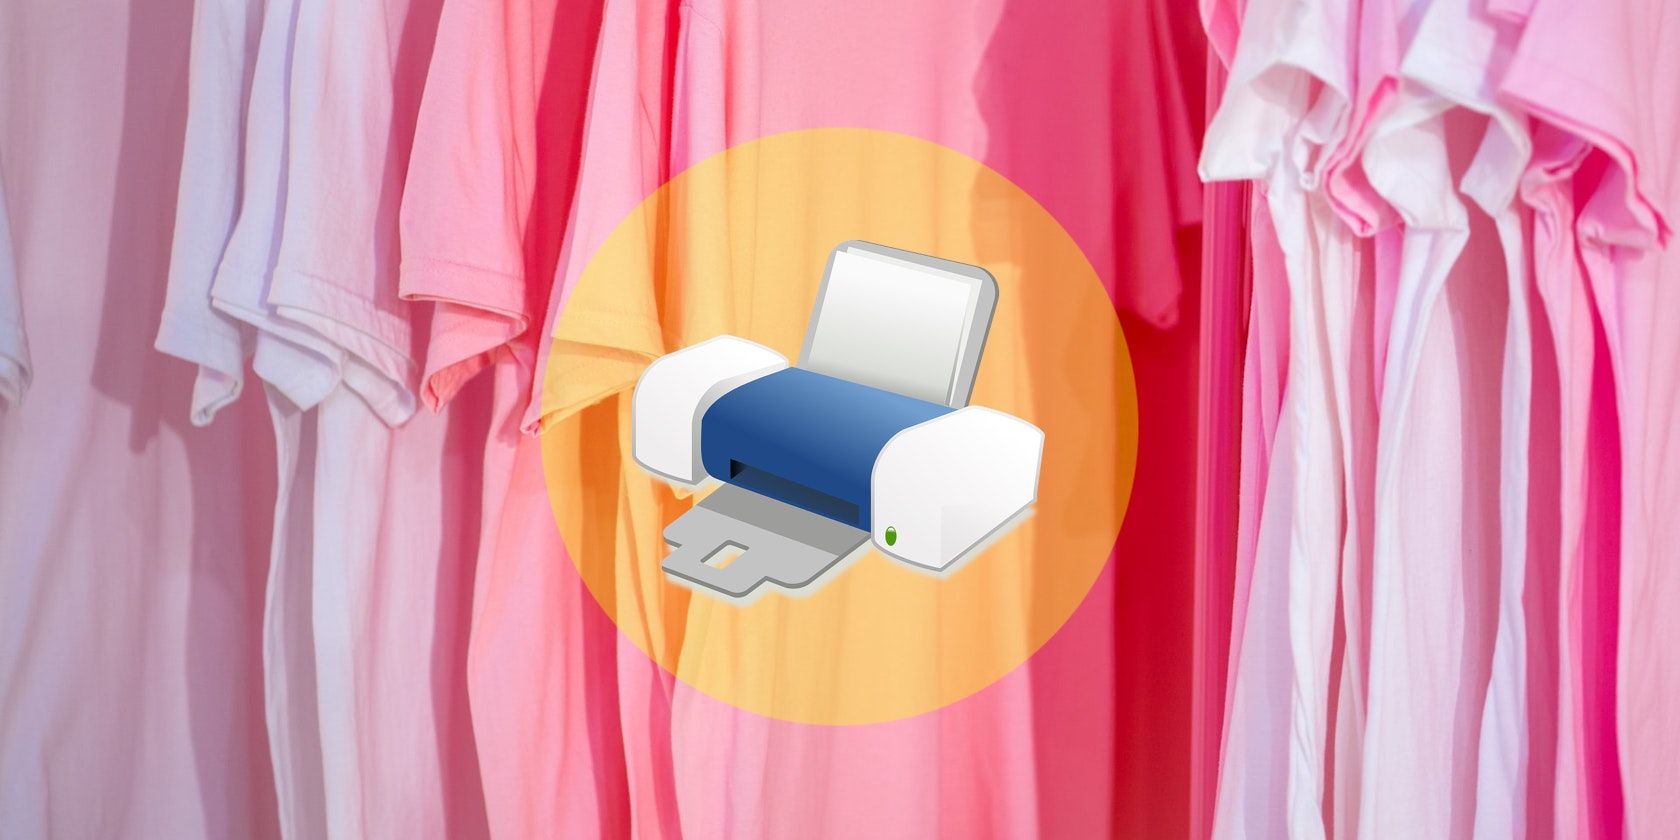 An illustration of a home printer over a background of pink t-shirts.